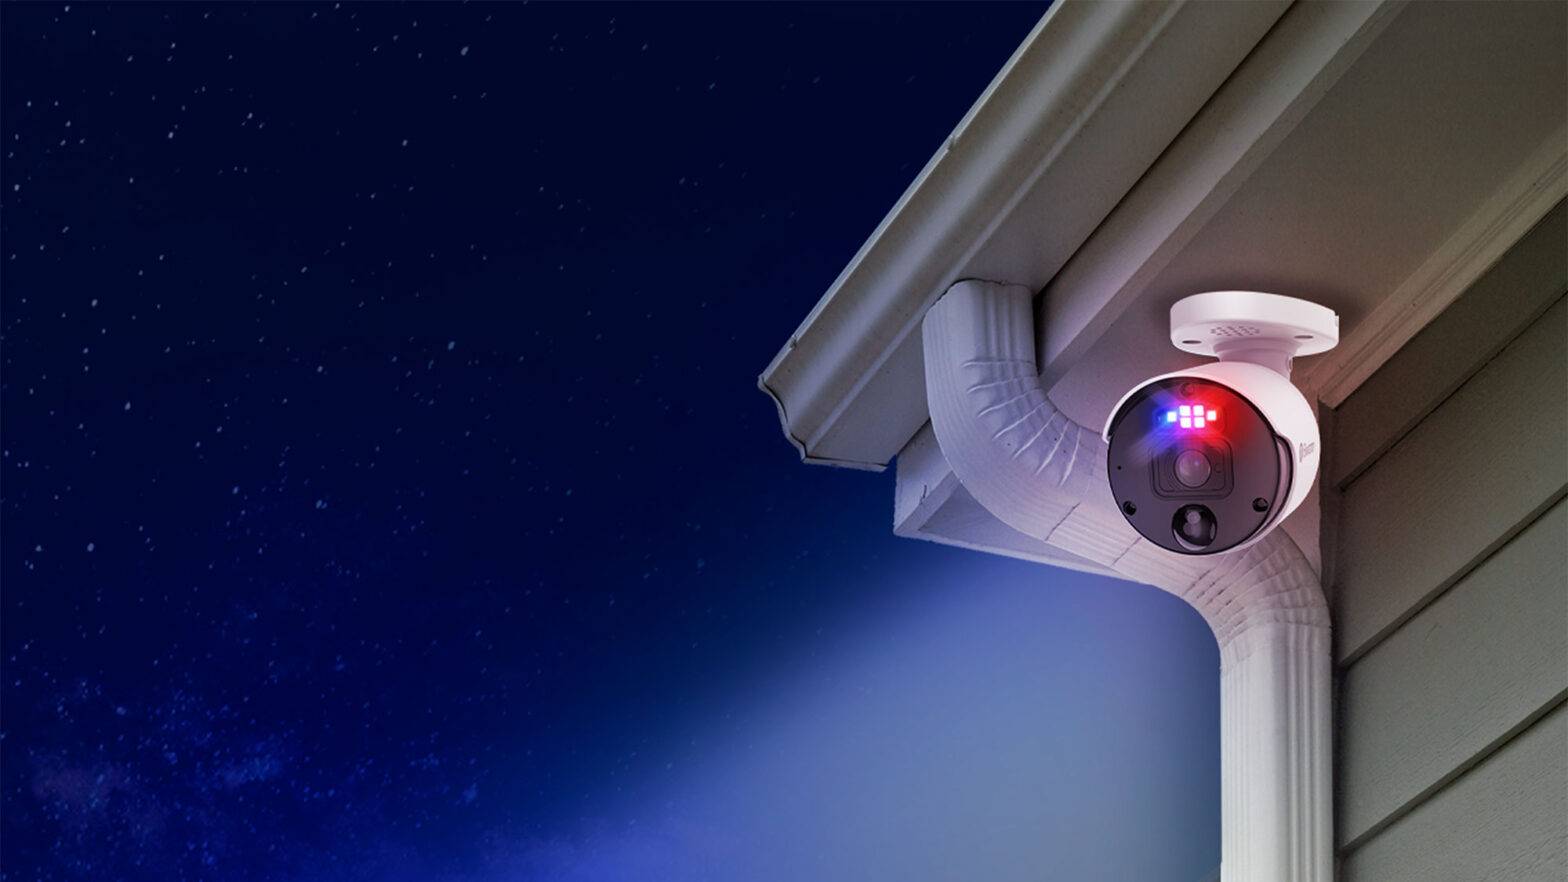 Security Lights With Cameras For The Home